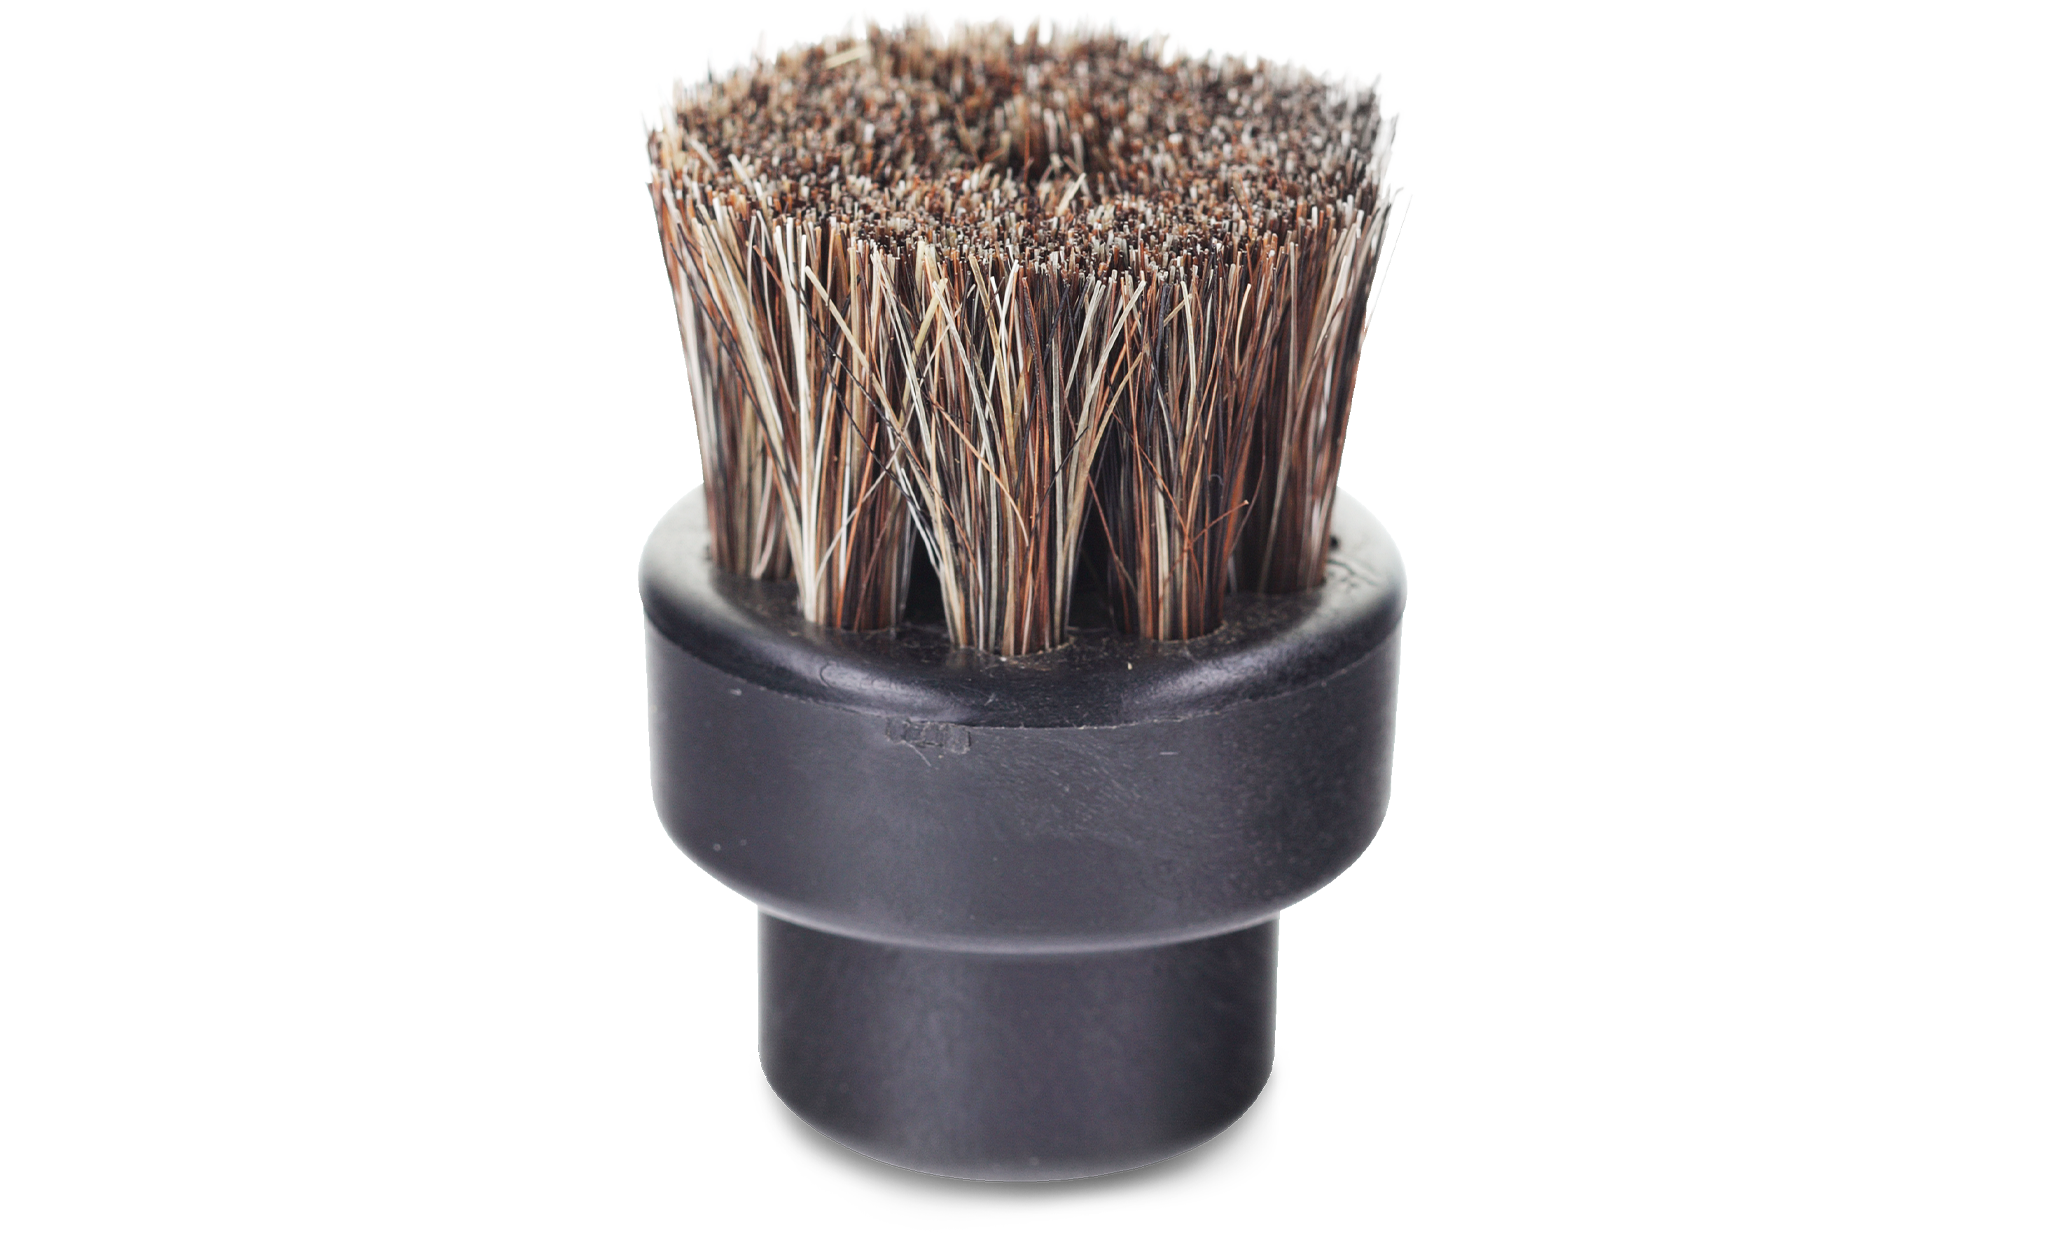 https://cdn.shopify.com/s/files/1/2781/4384/products/small-horsehair-brushes.png?v=1654200714